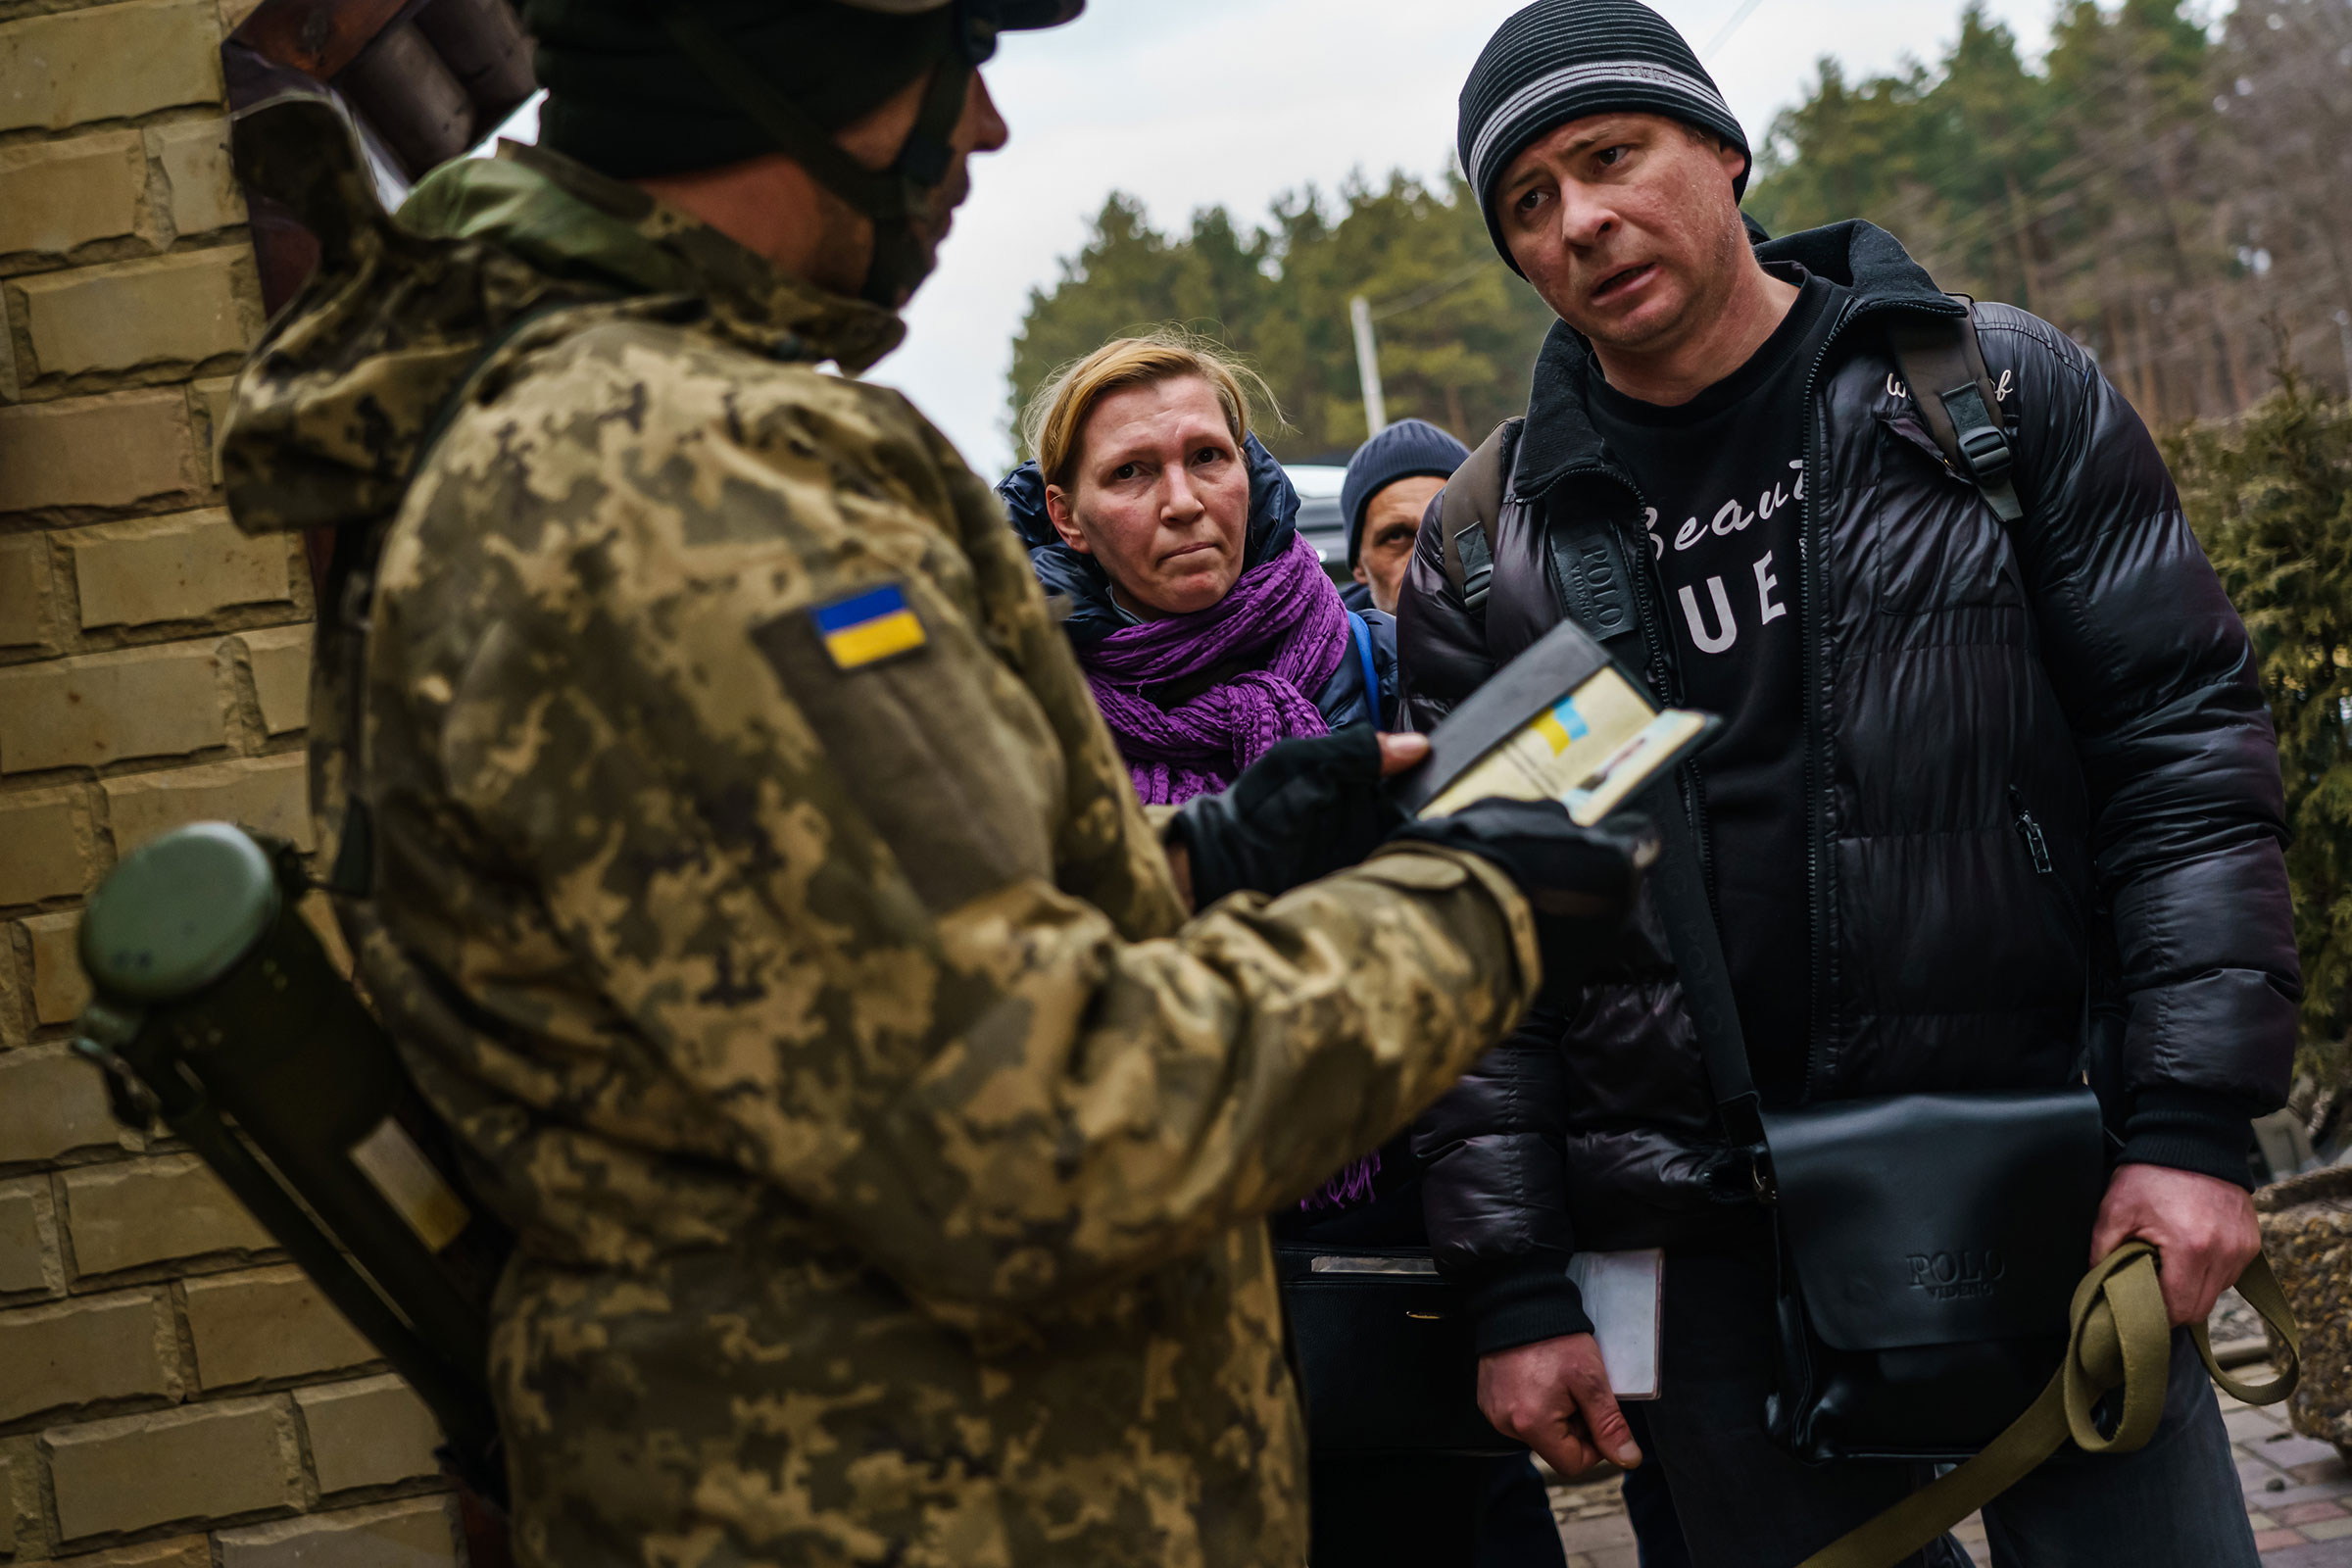 Civilians get their documents checked by soldiers as they evacuate Irpin on March 6.